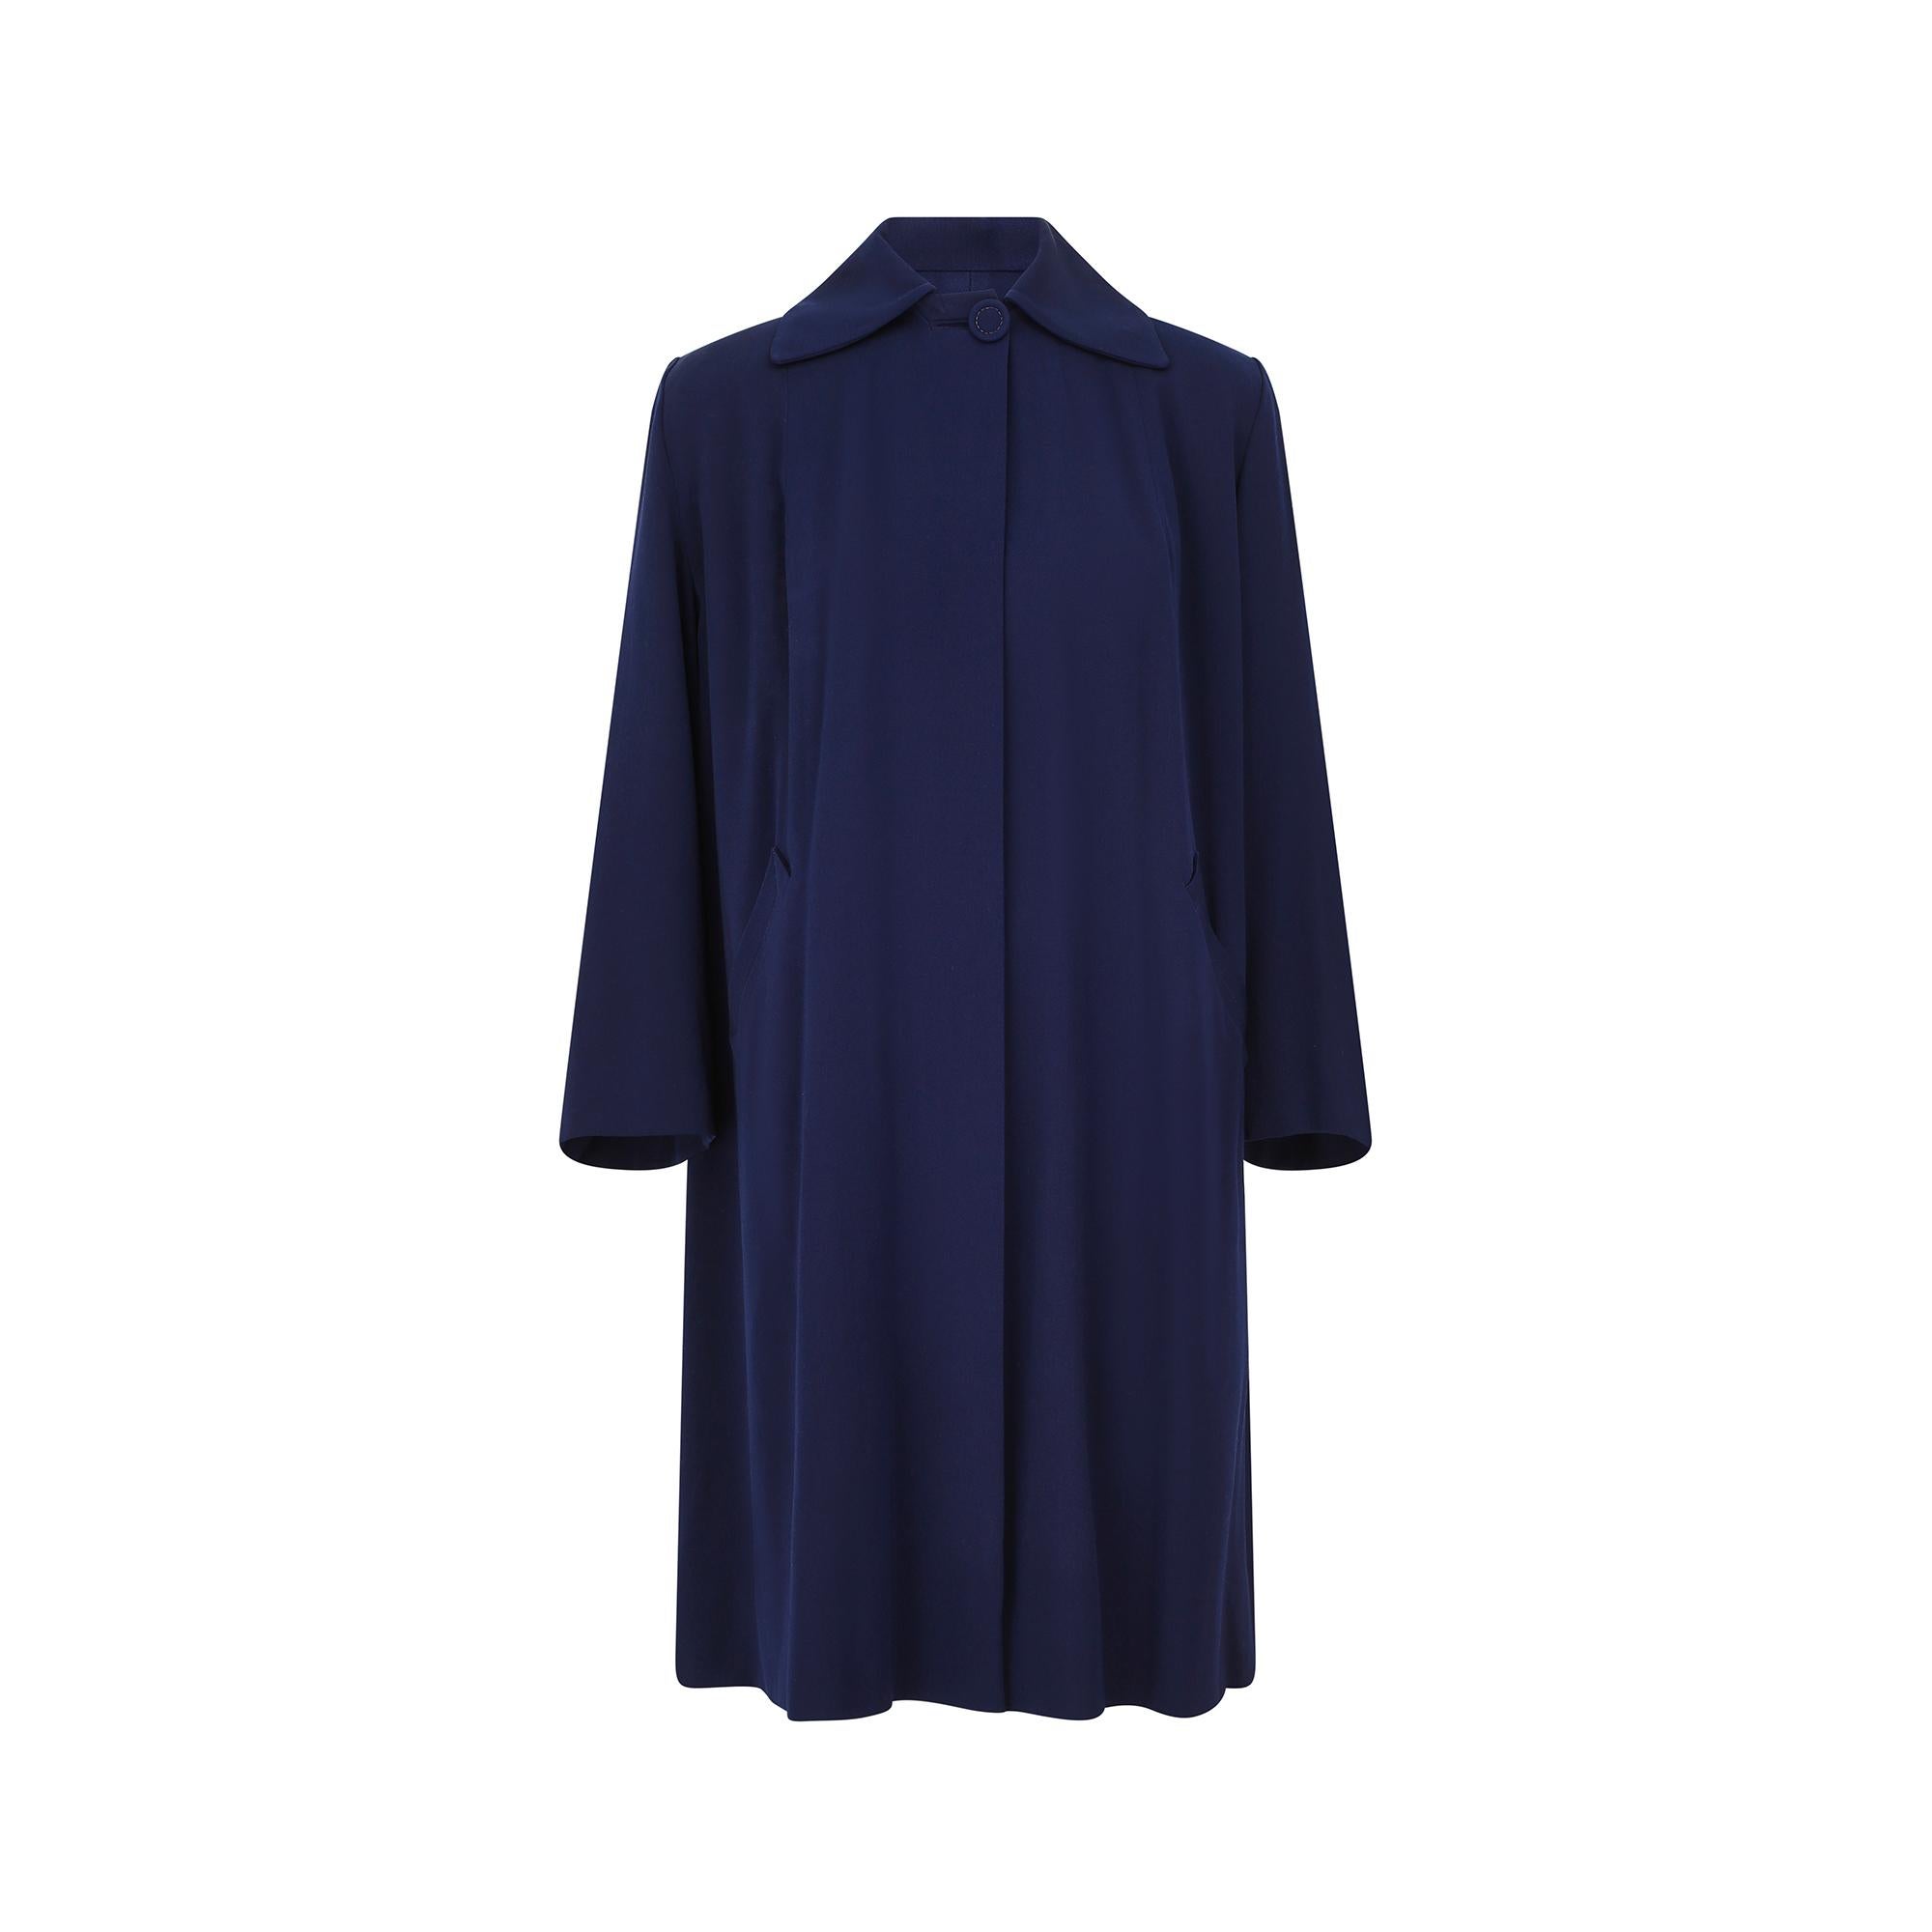 Popularised in the 1940s, the swing or swagger coat’s silhouette was generously cut and its playful, flared look made it a hit with the era’s most glamorous movers and shakers. This coat, which is between royal blue and navy in colour has two labels